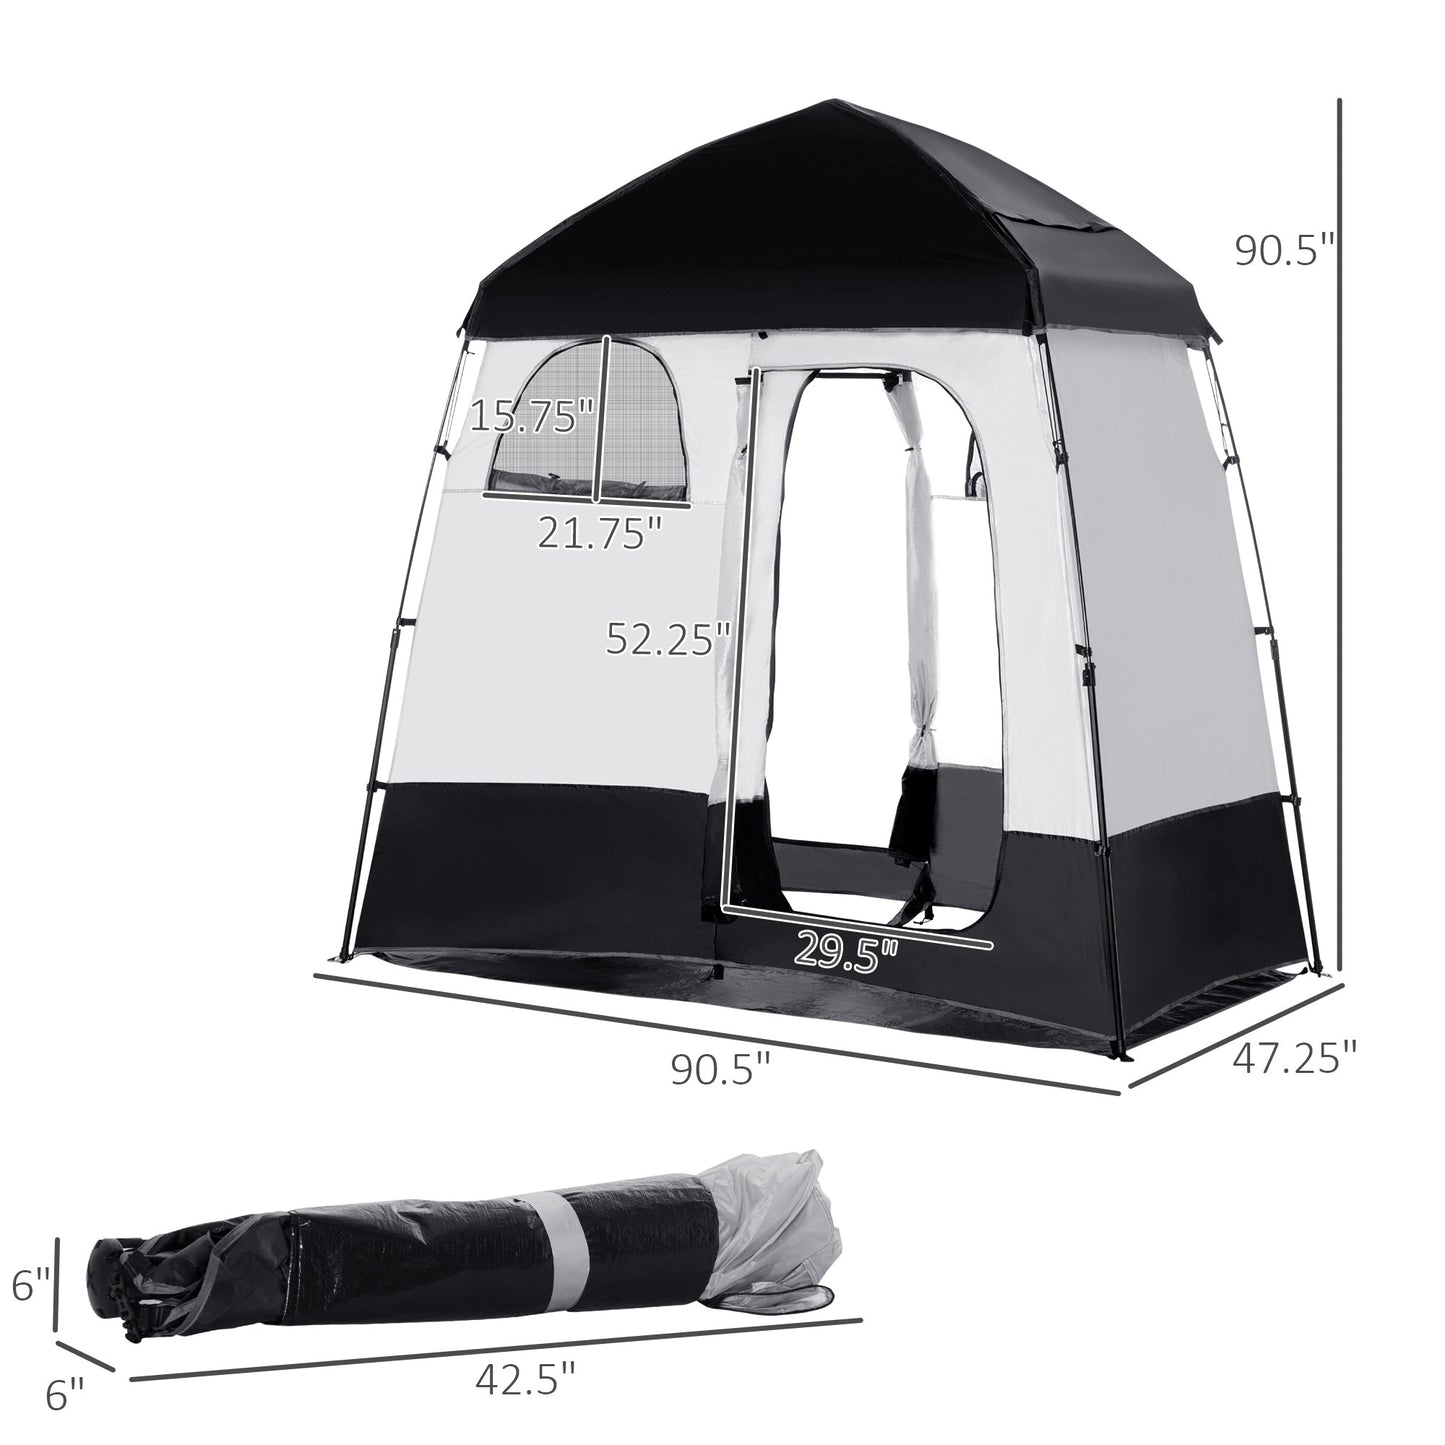 -Outsunny Pop Up Shower Tent w/ Two Rooms, Shower Bag, Floor and Carrying Bag, Portable Privacy Shelter, Instant Changing Room for 2 Person, Black - Outdoor Style Company